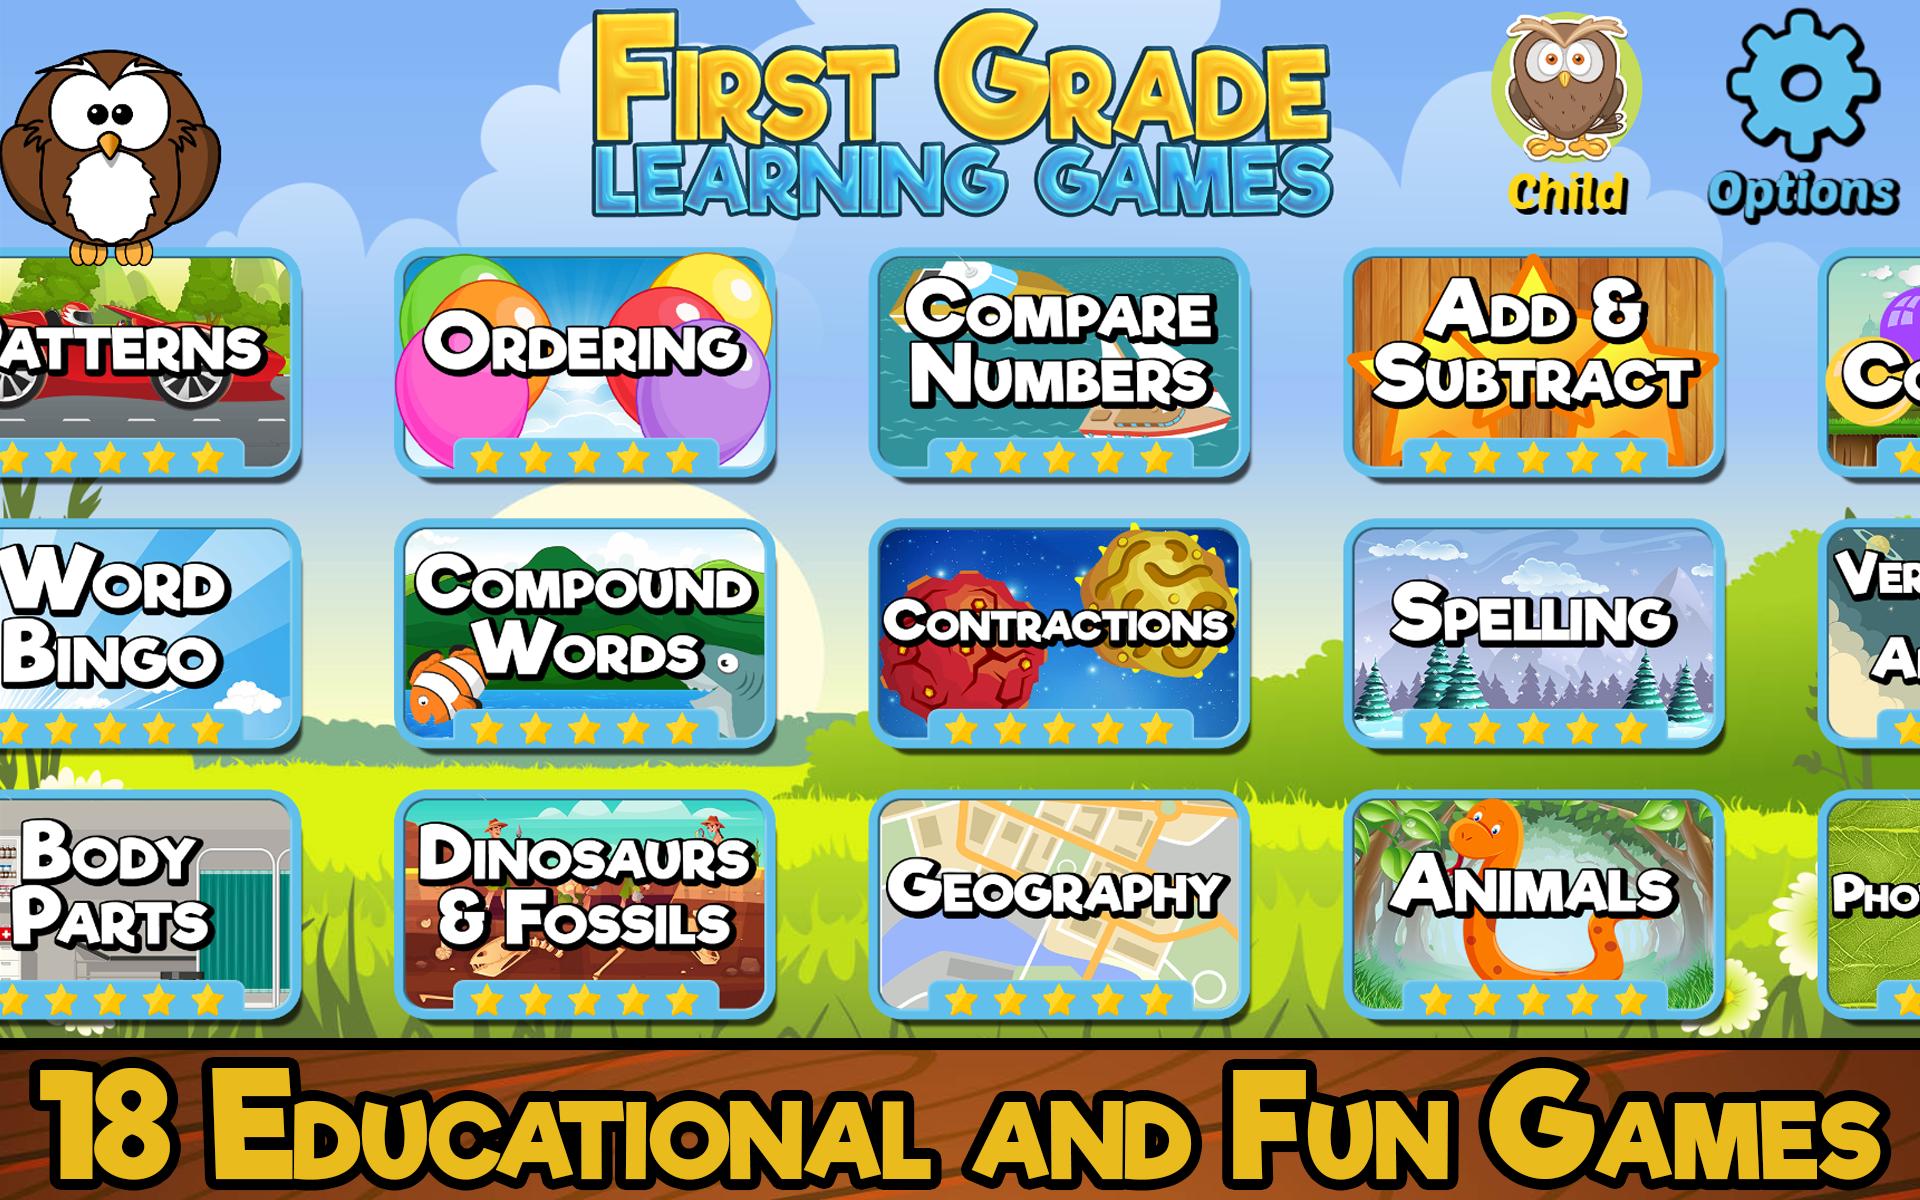 First Grade Learning Games for Android - APK Download